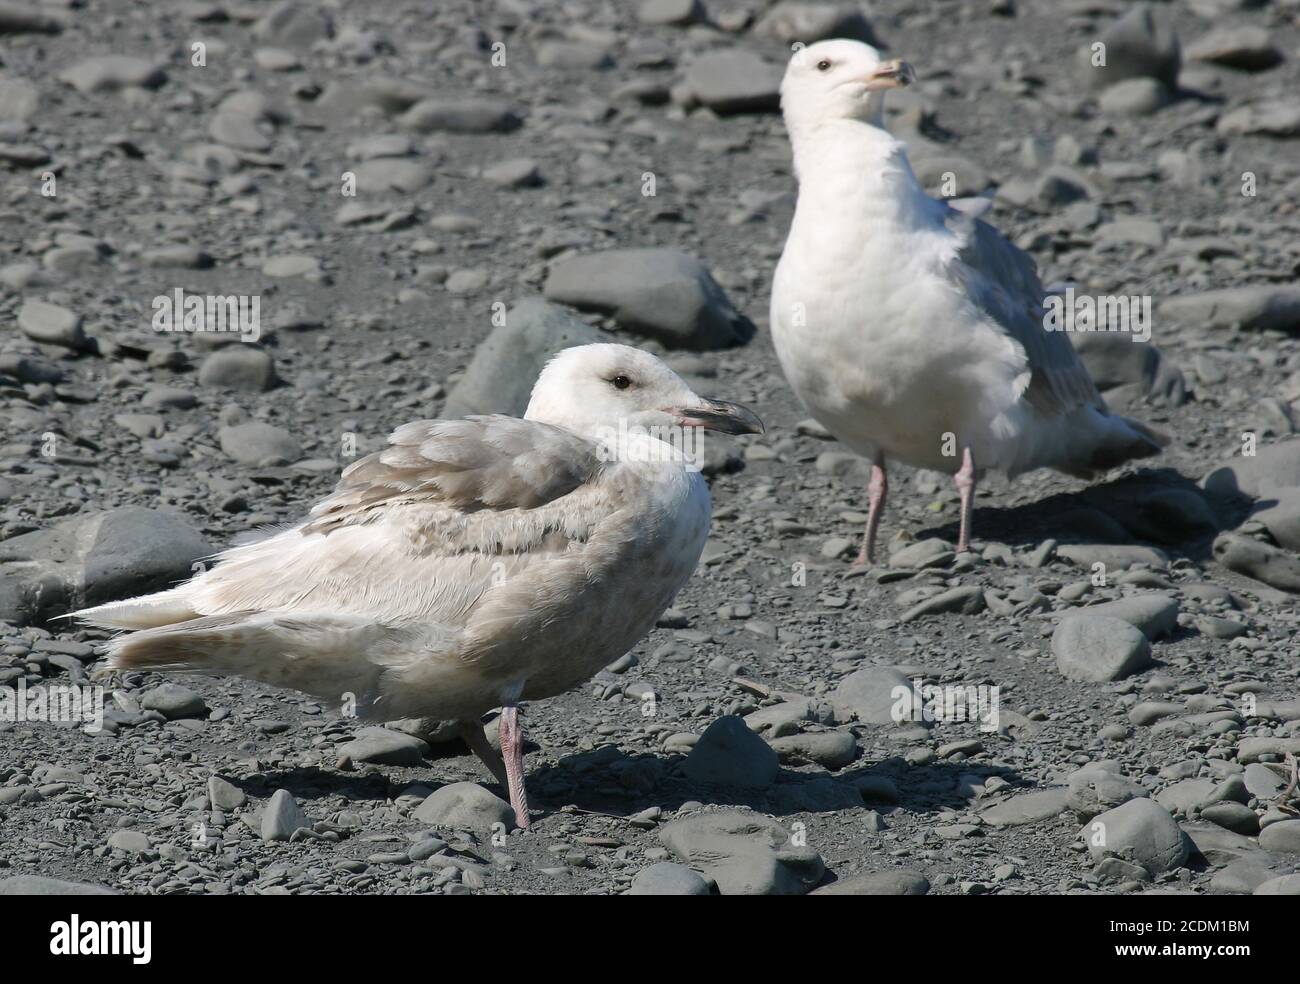 glaucous-winged gull (Larus glaucescens), Immature standing on bank of pebbles along the coast, USA, Alaska Stock Photo